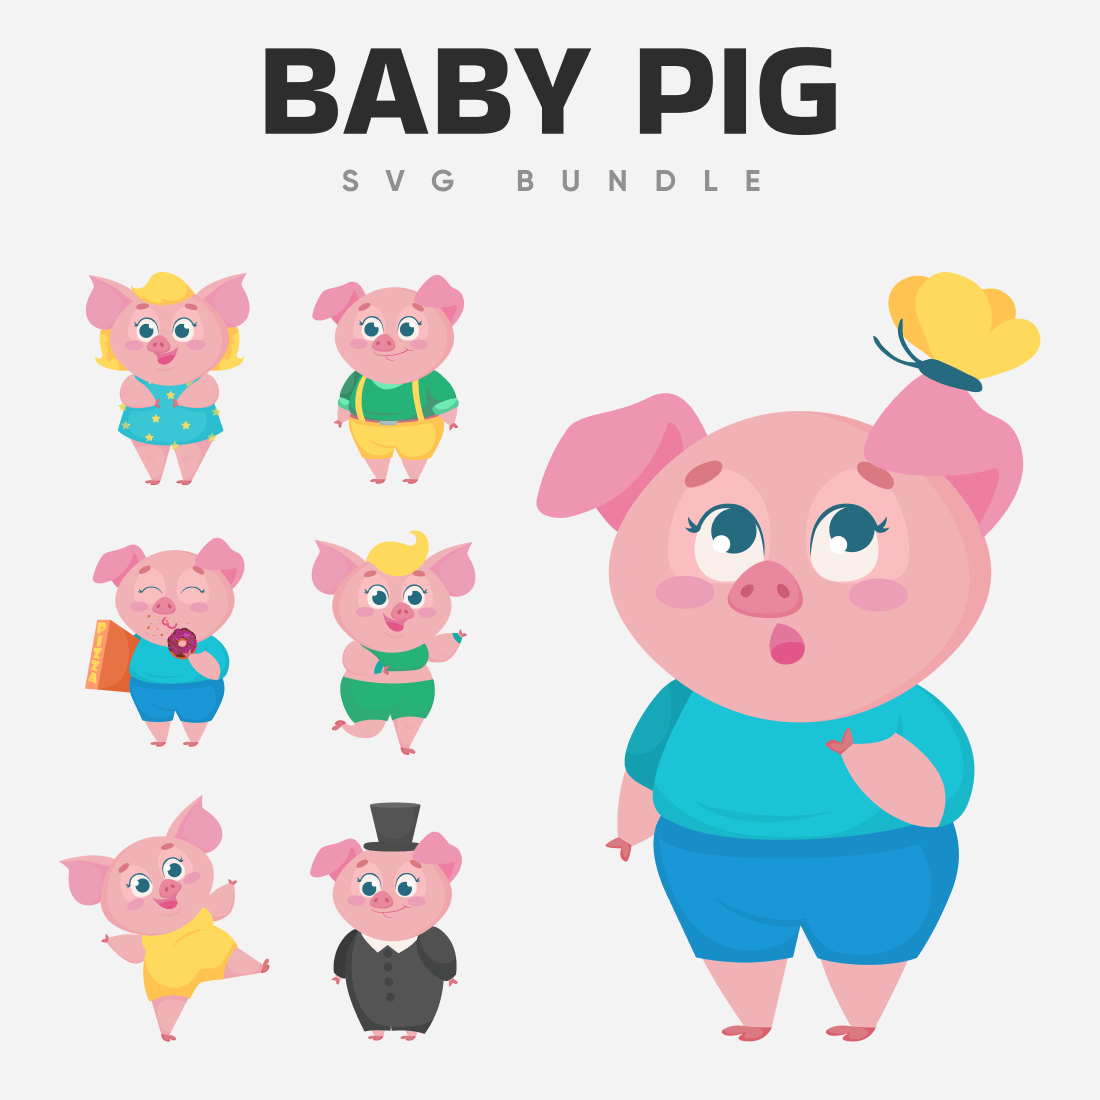 A mysterious big pig with a butterfly on its ear and other pigs are busy with their fun life.